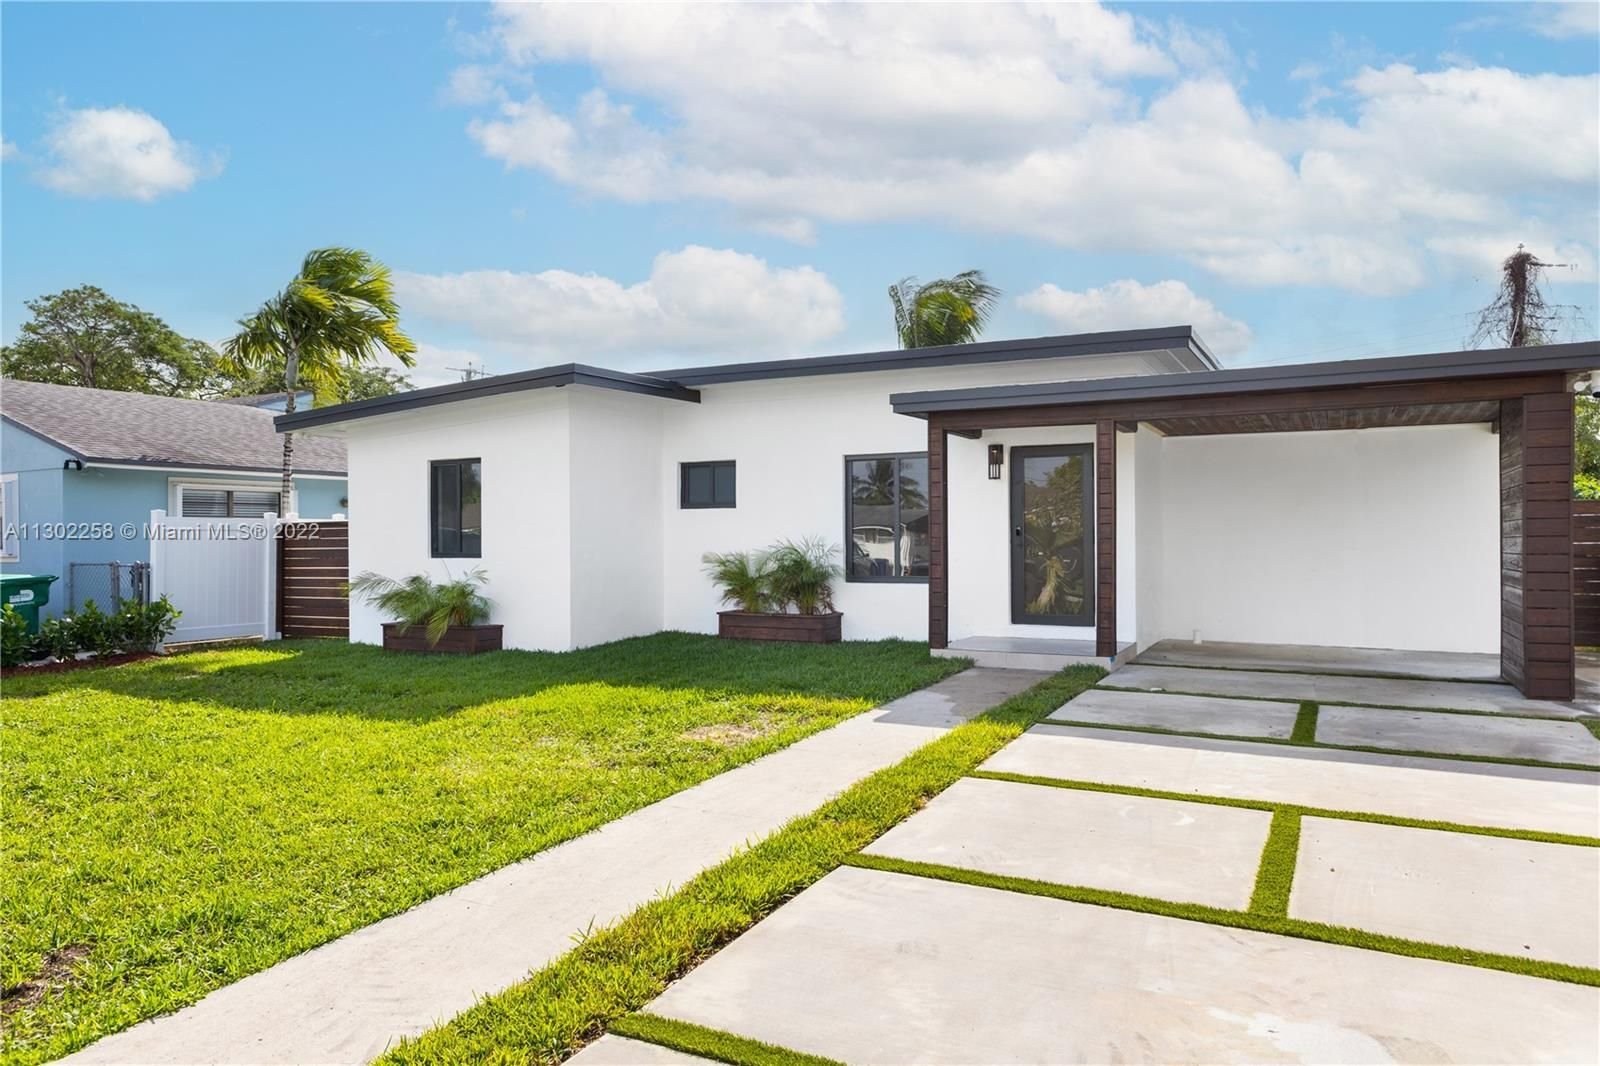 Real estate property located at 6440 42nd St, Miami-Dade County, Miami, FL